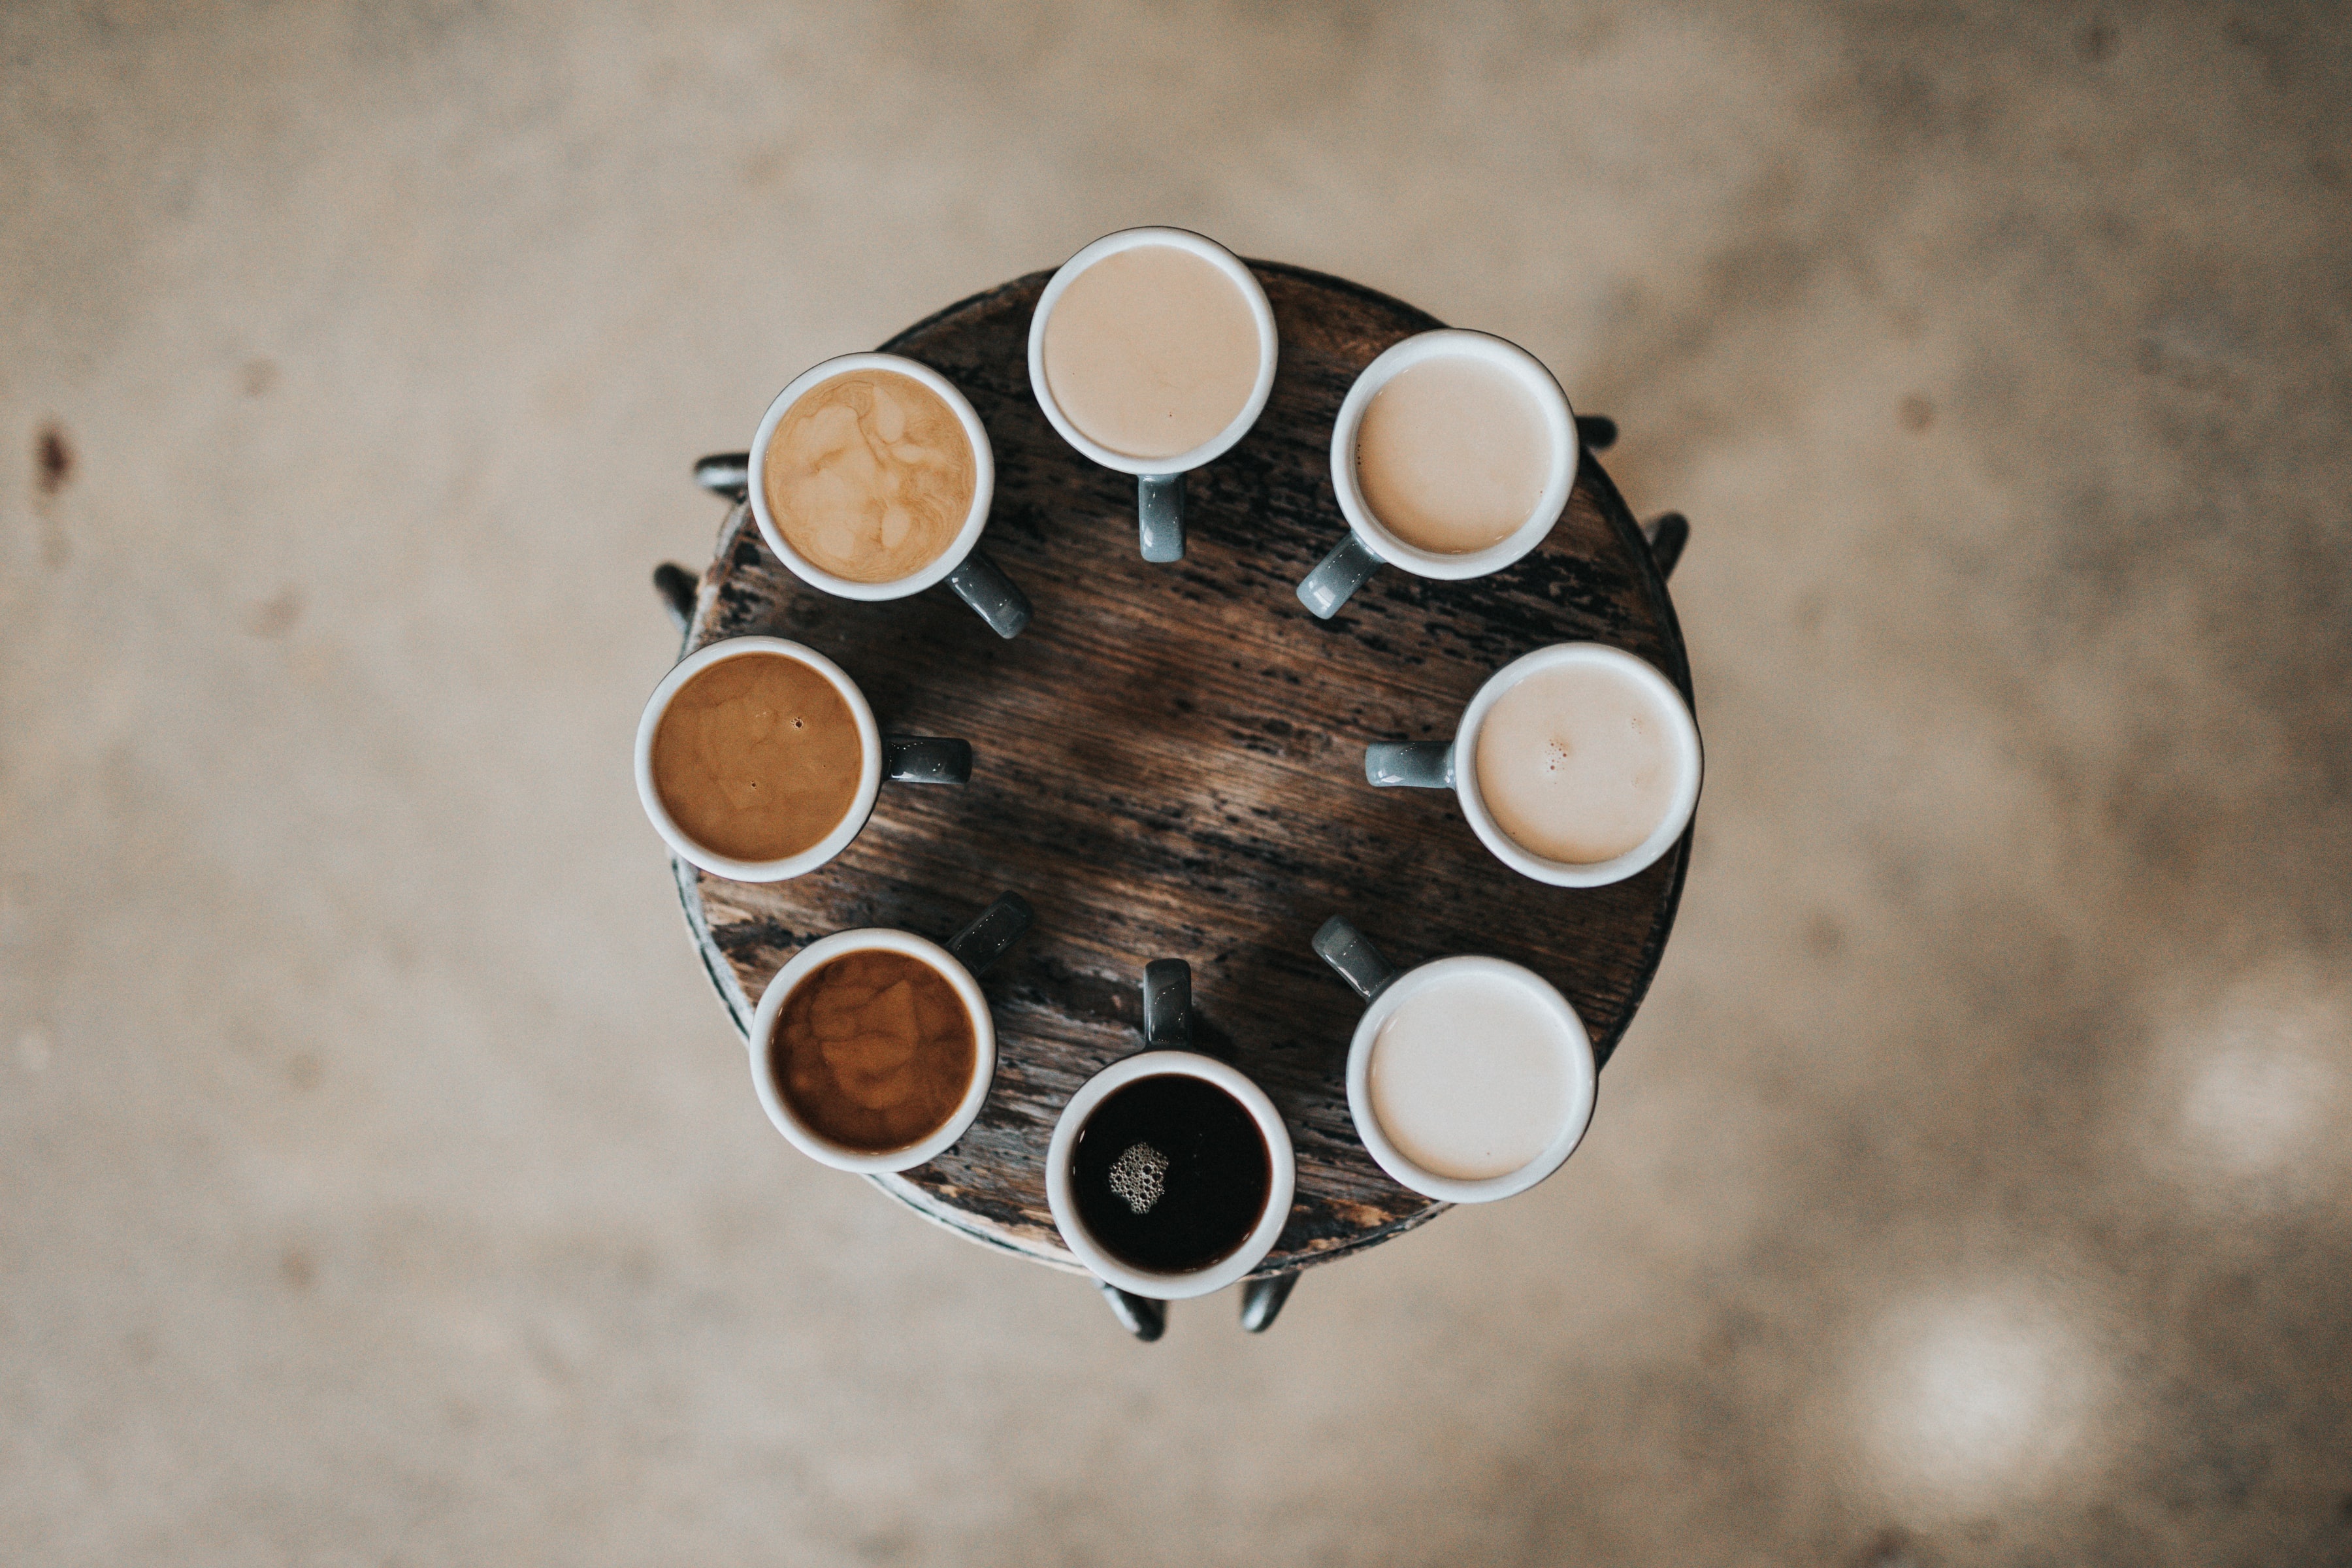 Cups of coffee on a little circular table